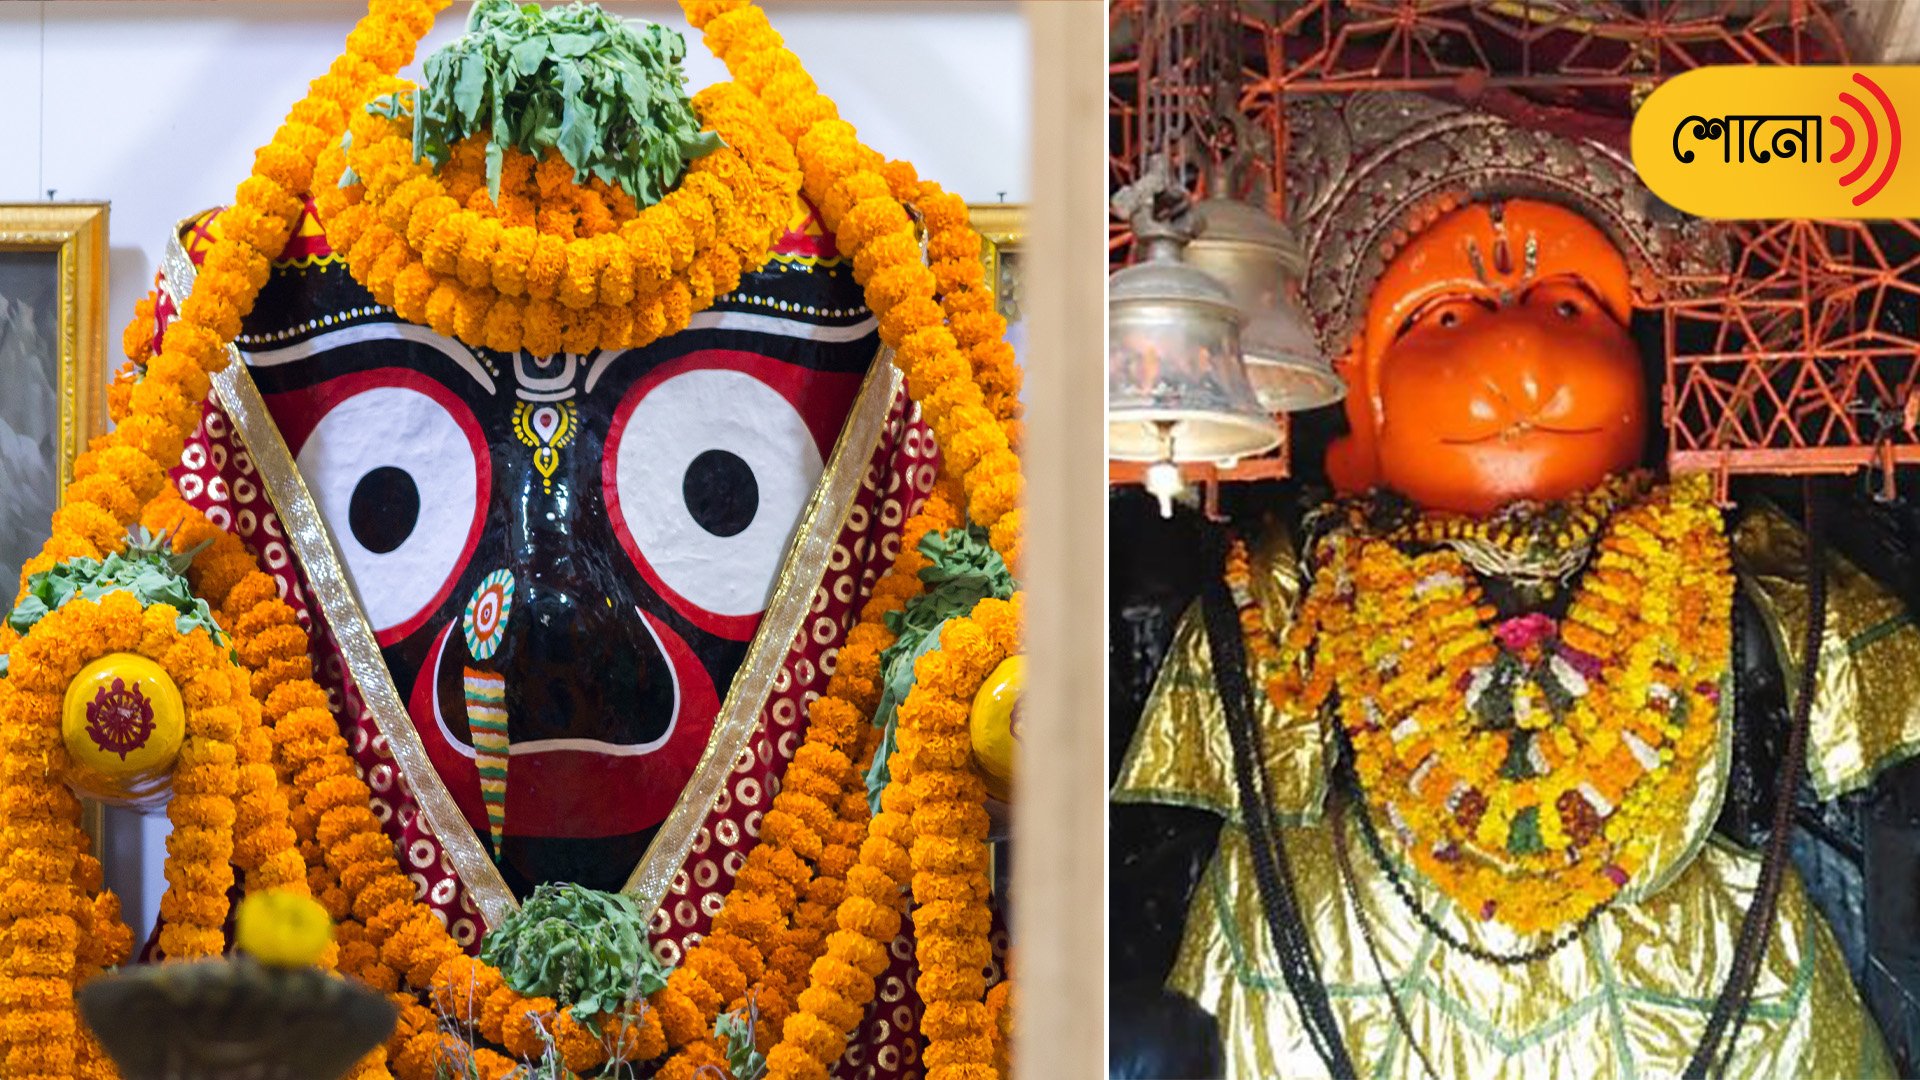 Know more about the history of Bedi Hanuman Temple in Puri